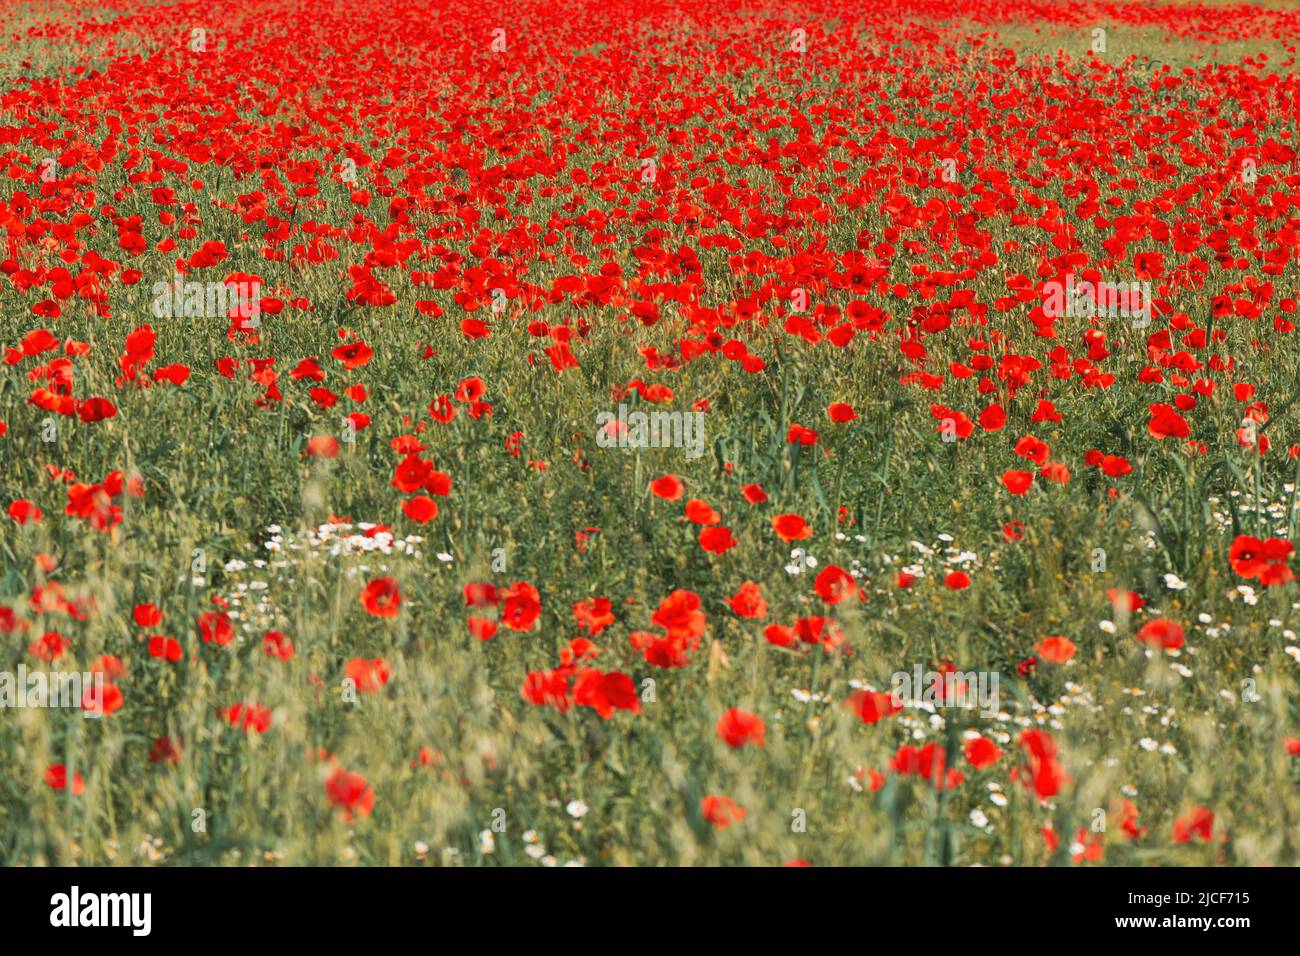 Papaver rhoeas or red poppy flower in meadow. This flowering plant is used a symbol of remembrance of the fallen soldiers. Selective focus Stock Photo